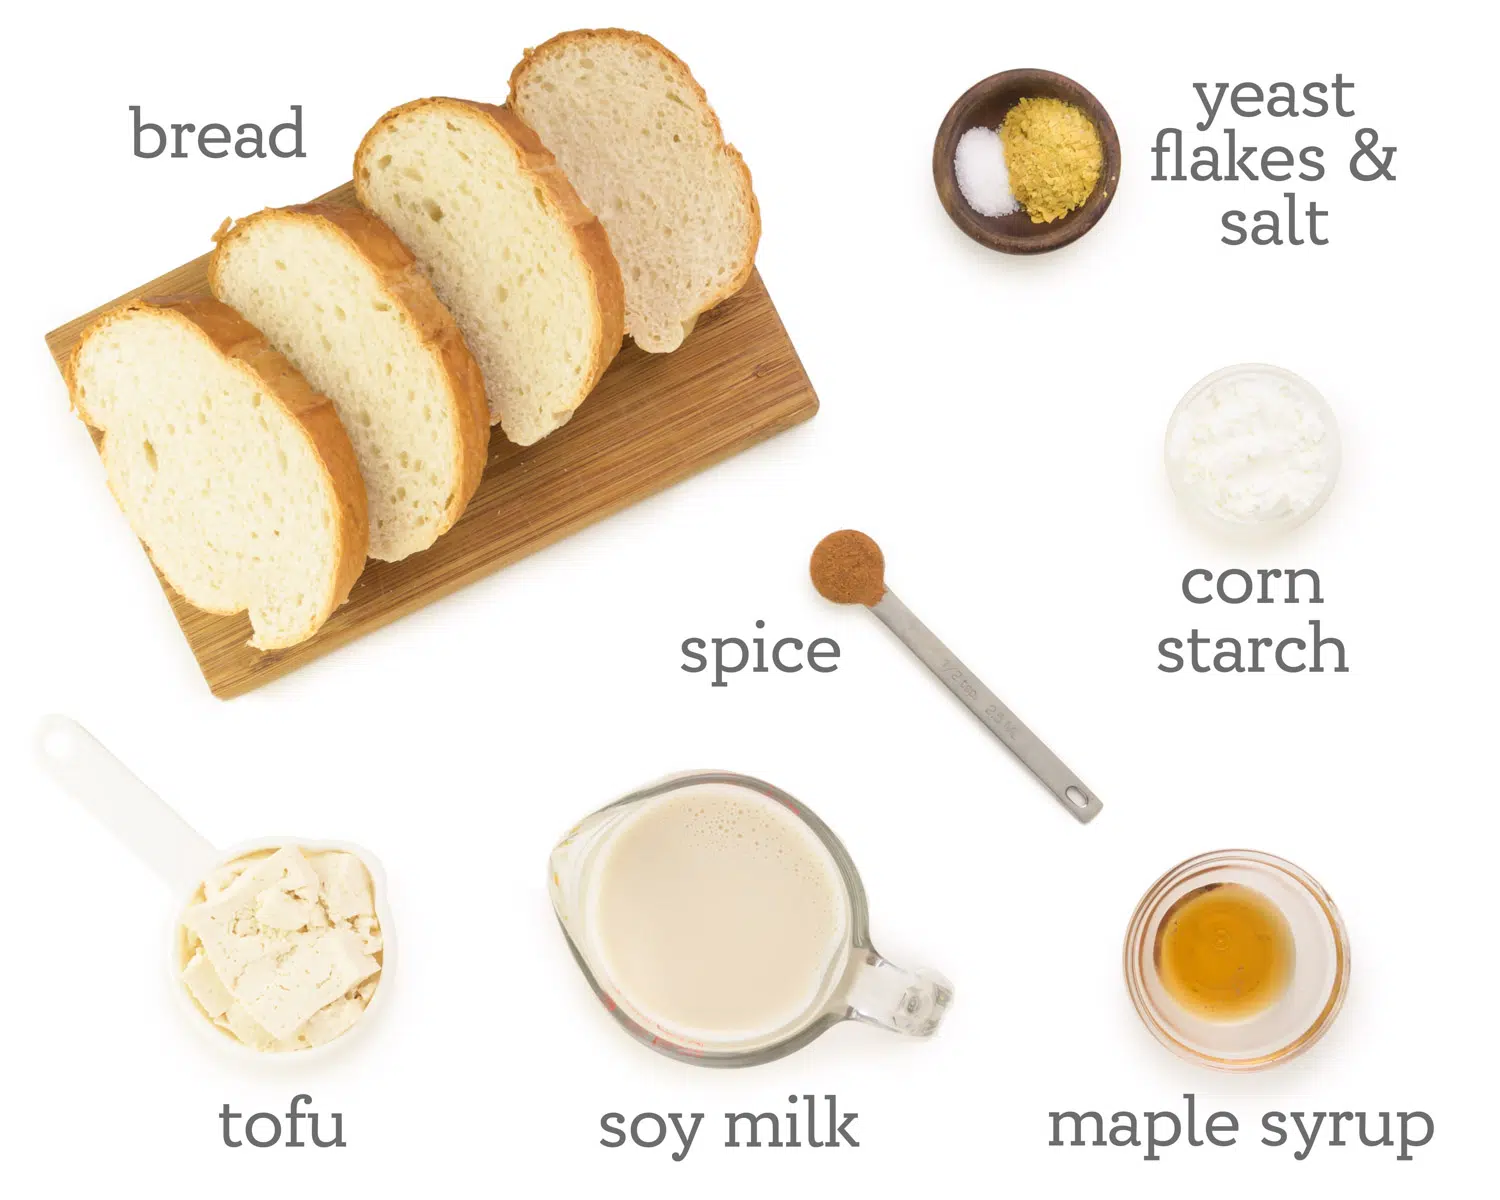 Ingredients are laid out on a white table. The labels next to them read, yeast flakes & salt, corn starch, maple syrup, spice, soy milk, tofu, and bread.